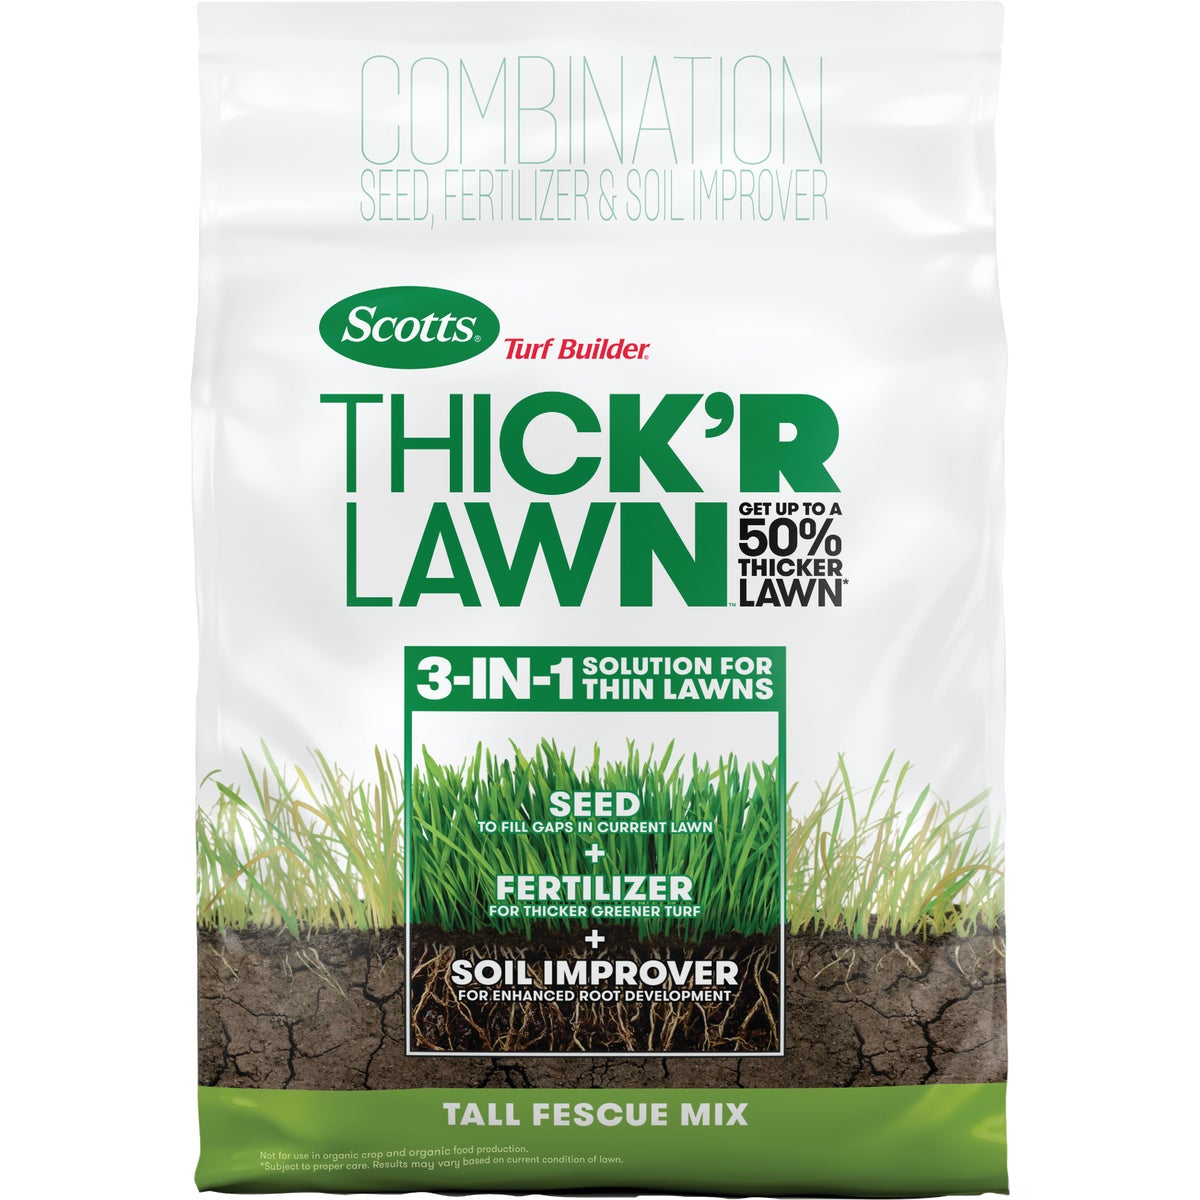 Scotts Turf Builder Thick'R Lawn 12 Lb. 1200 Sq. Ft. Coverage Combination Tall Fescue Mix Grass Seed, Fertilizer, & Soil Improver